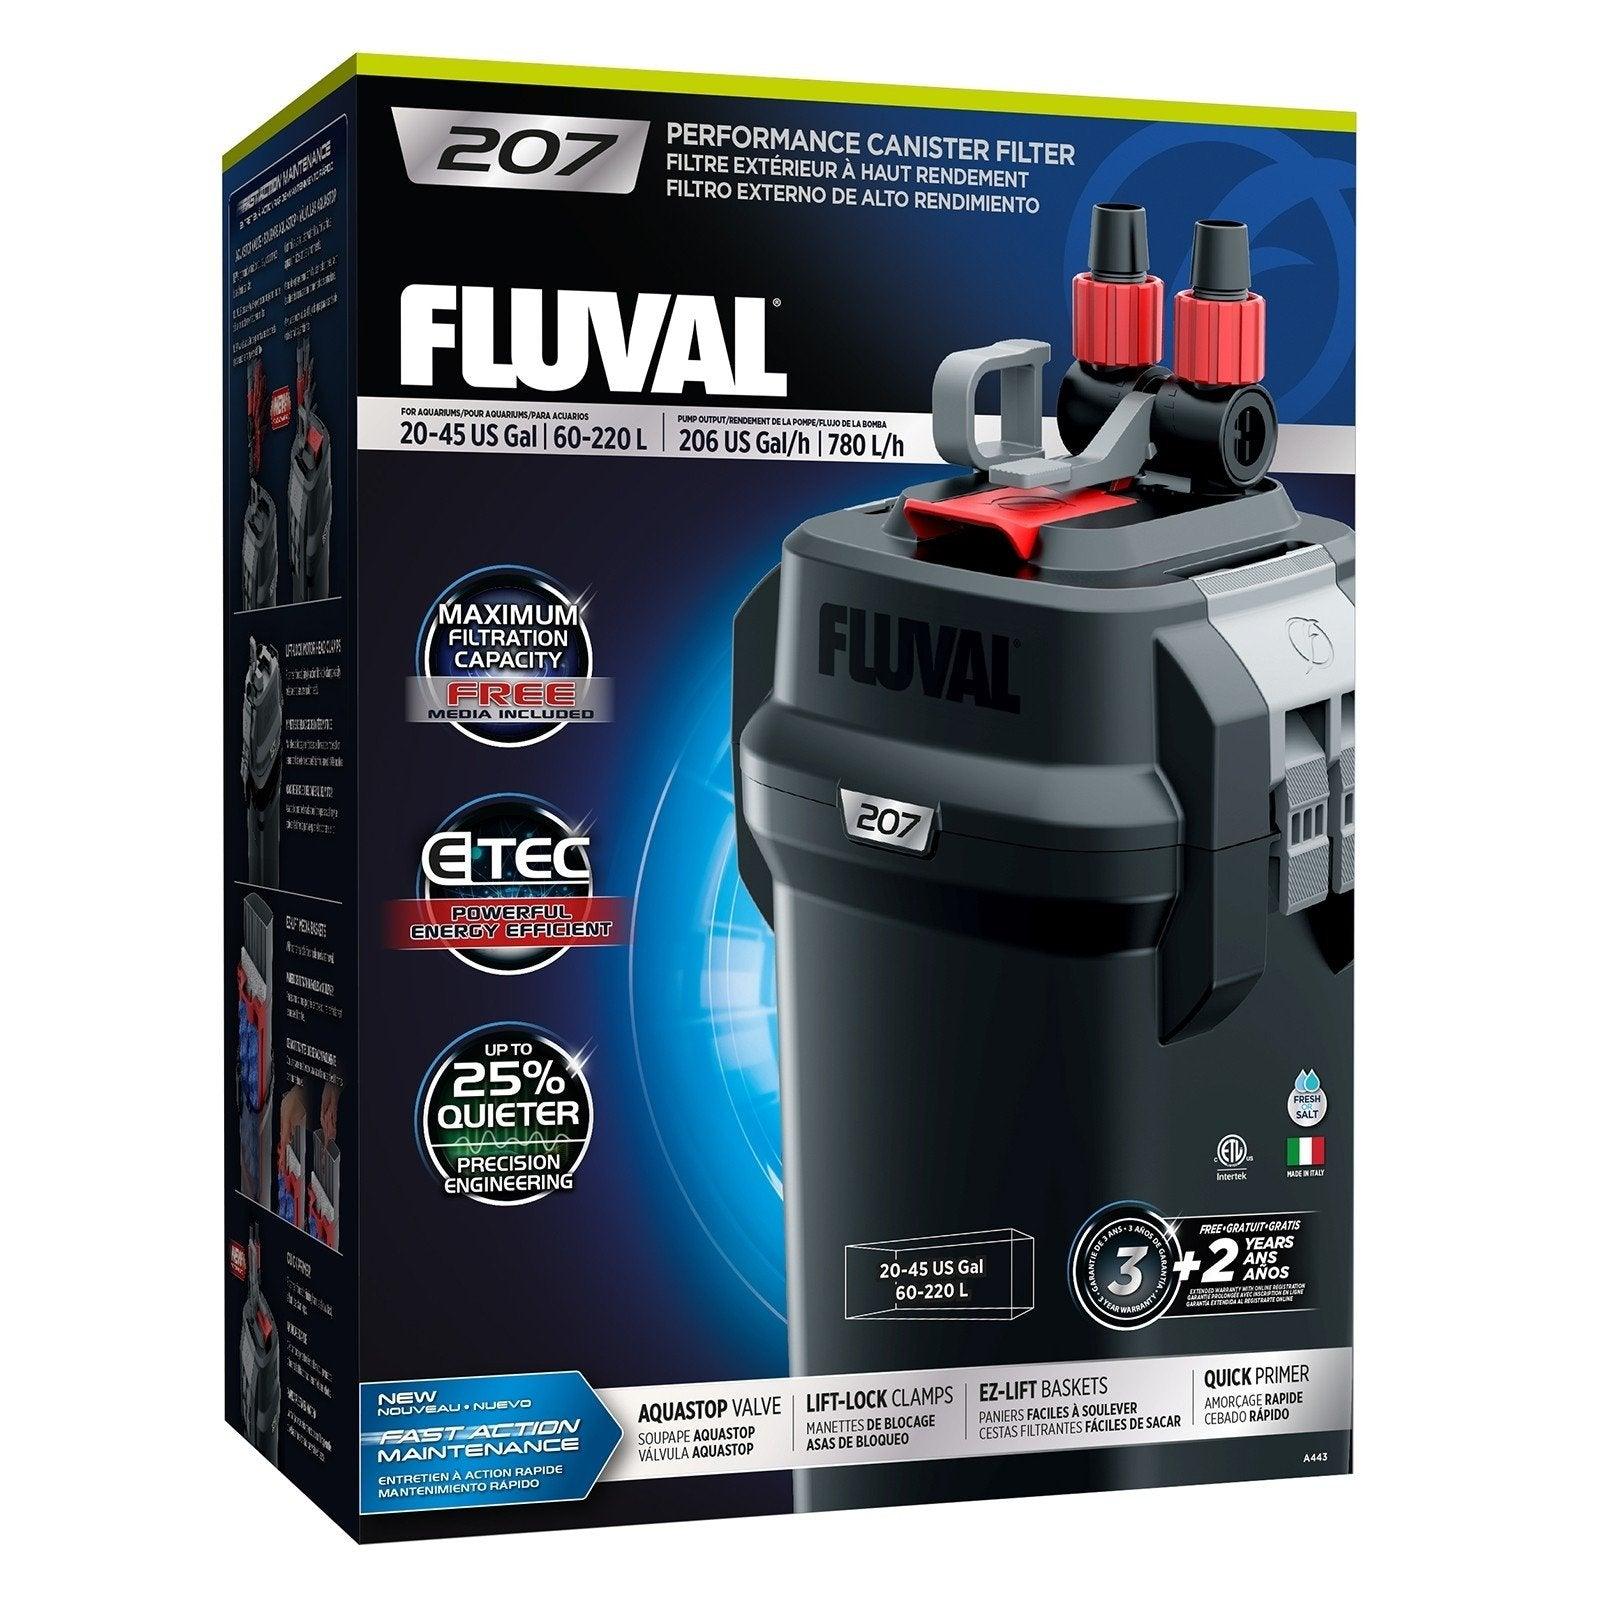 Fluval 207 Canister Filter with Free Phosphate Pad